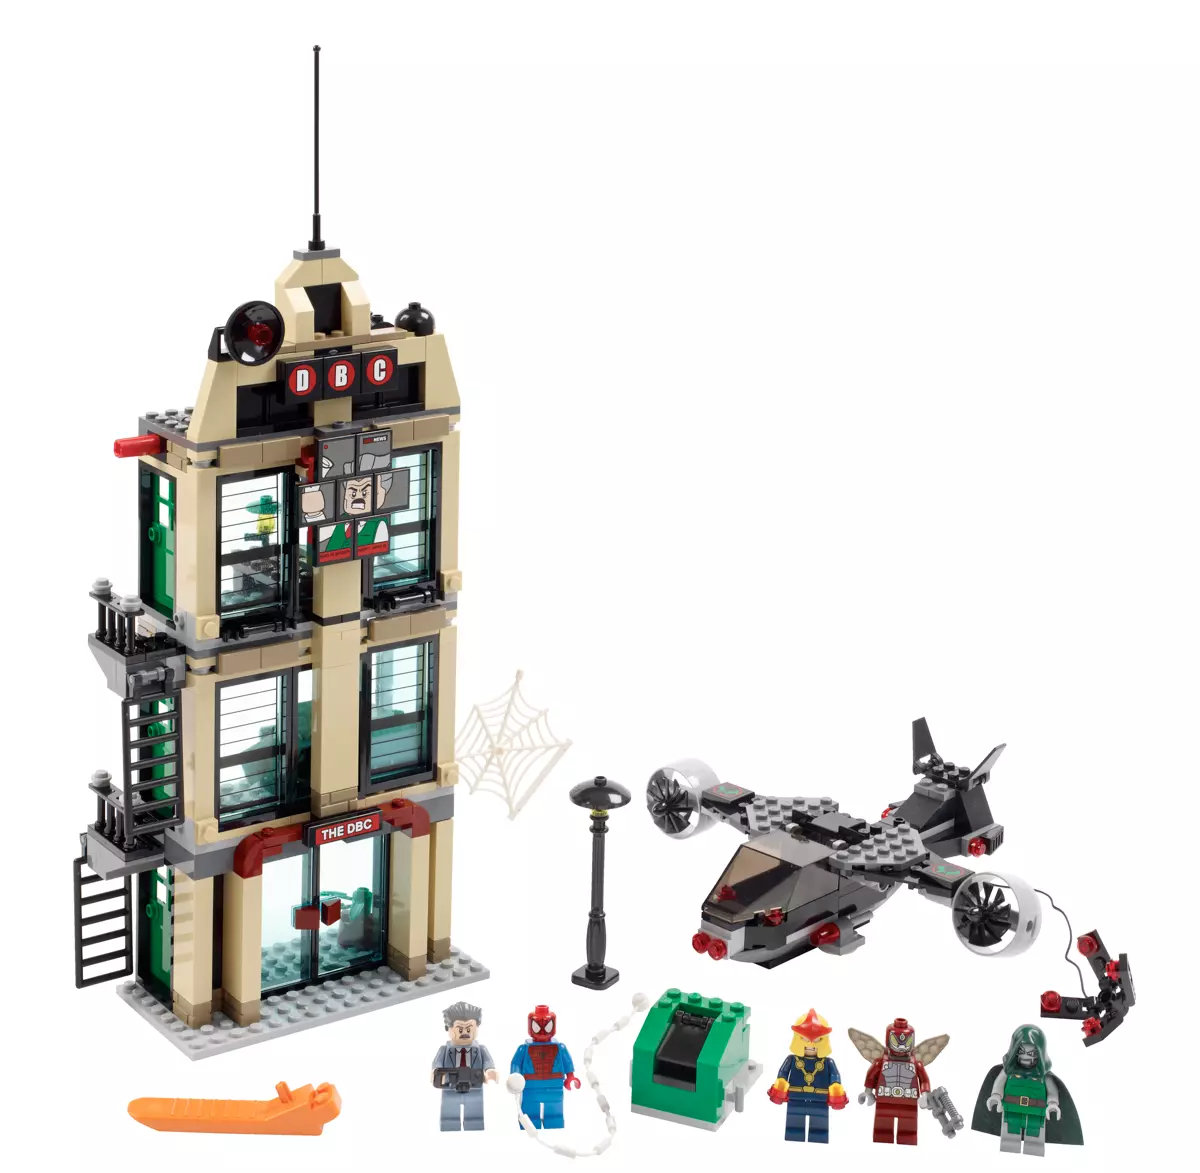 Lego Unveils New Marvel And DC Sets [NYCC 2012]